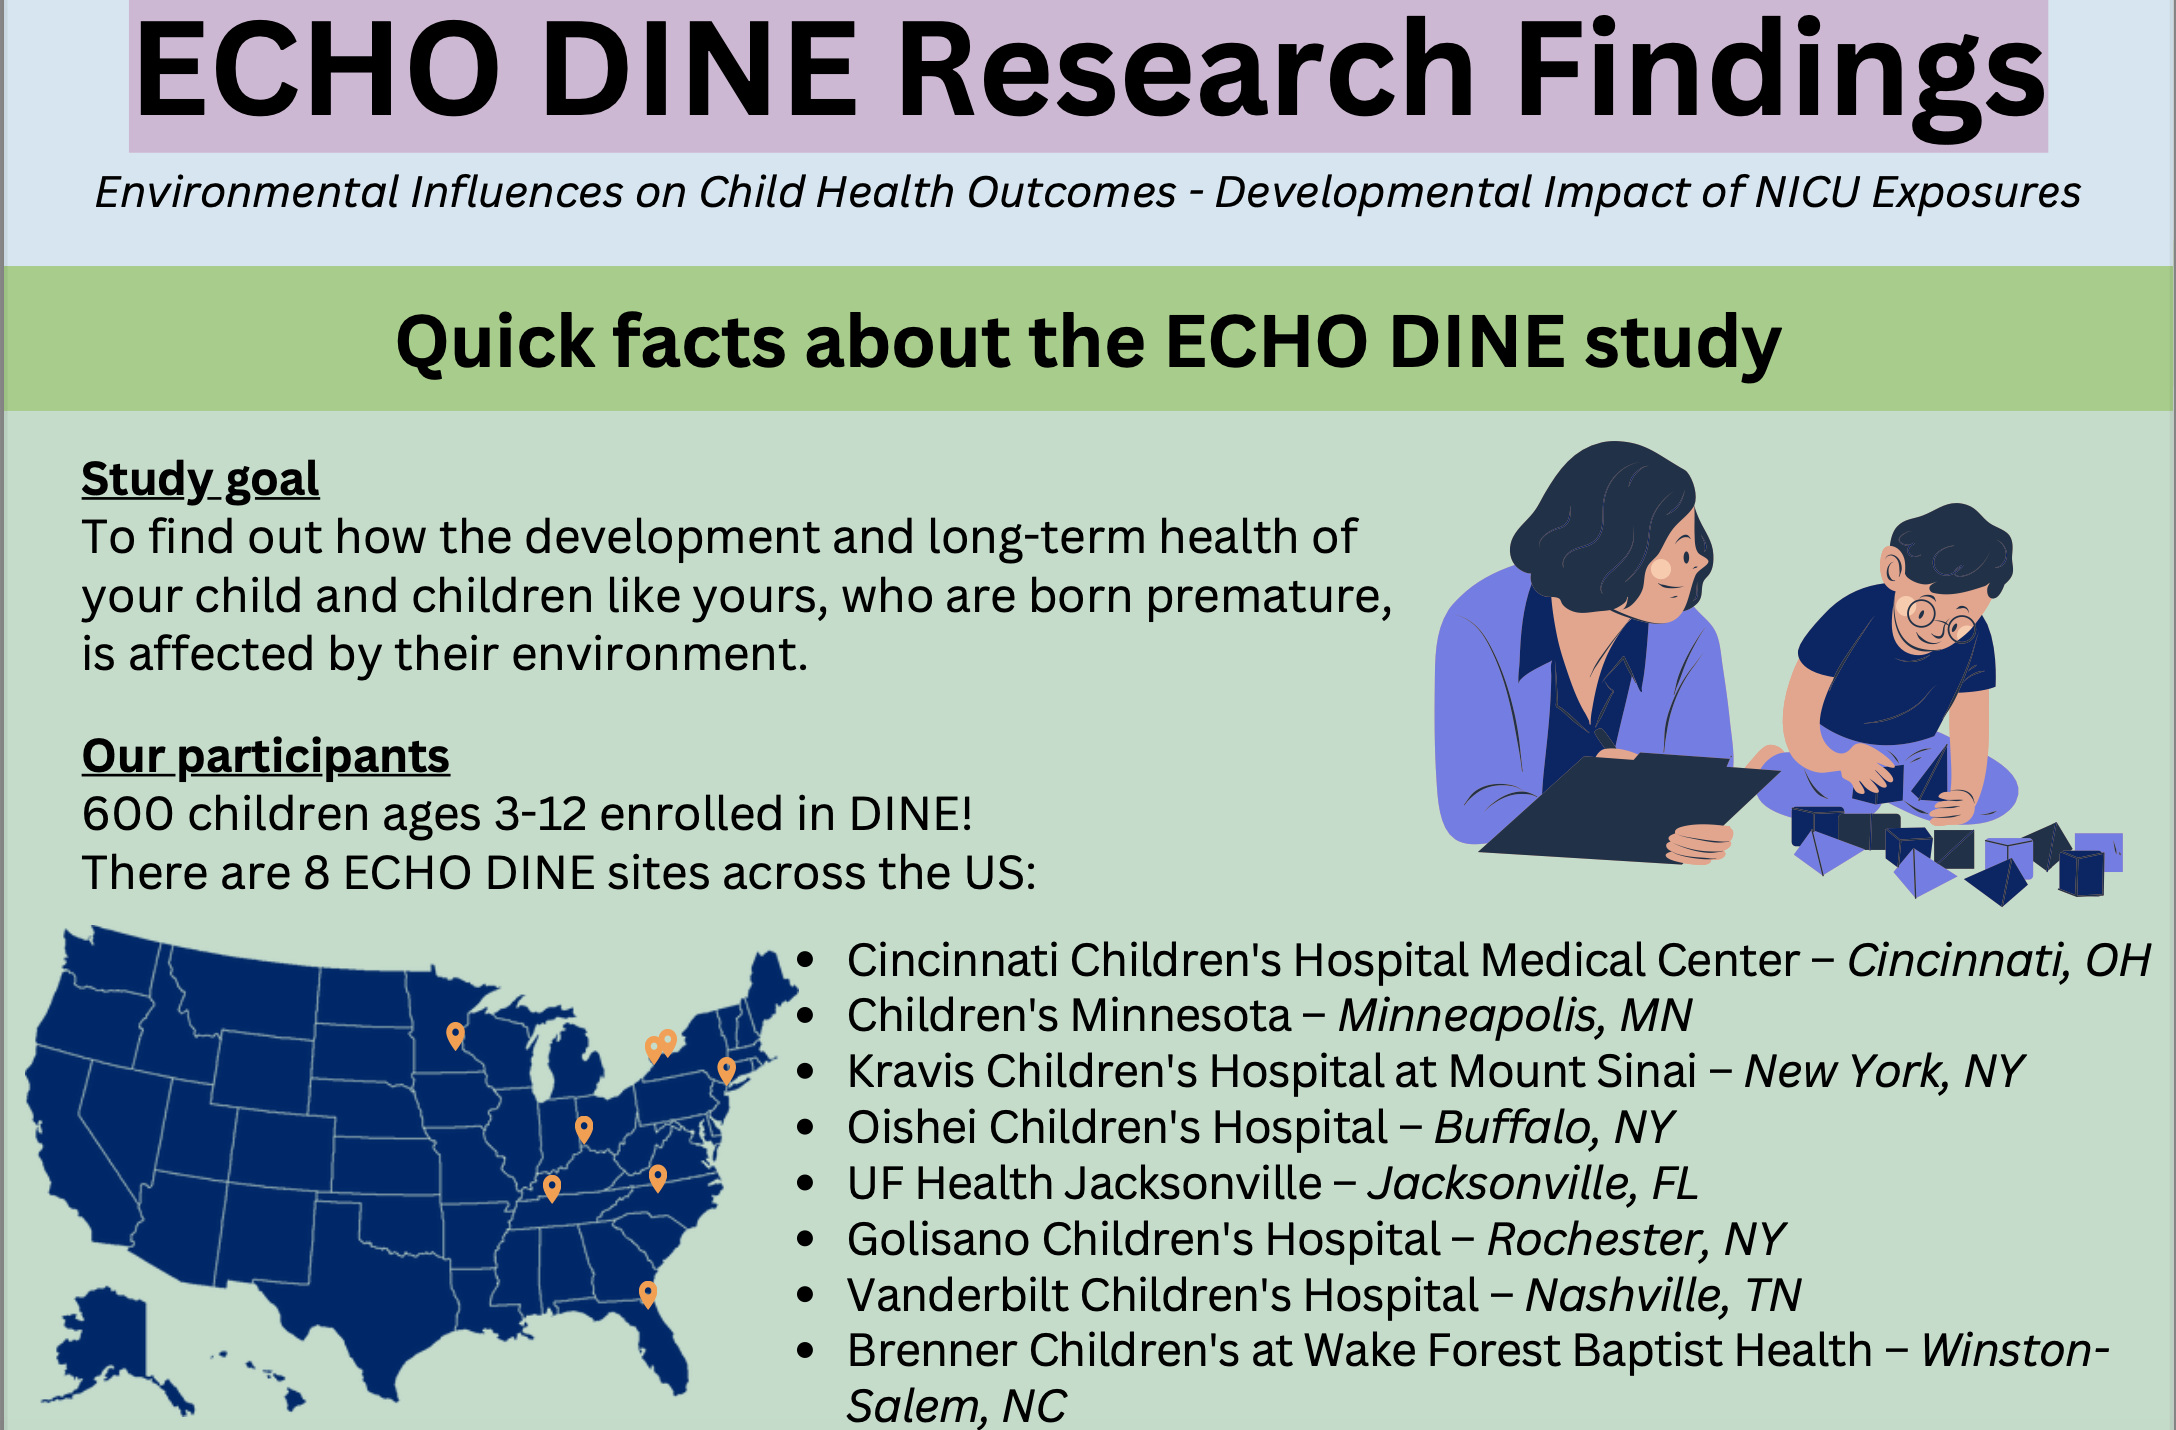 Quick Facts about ECHO DINE